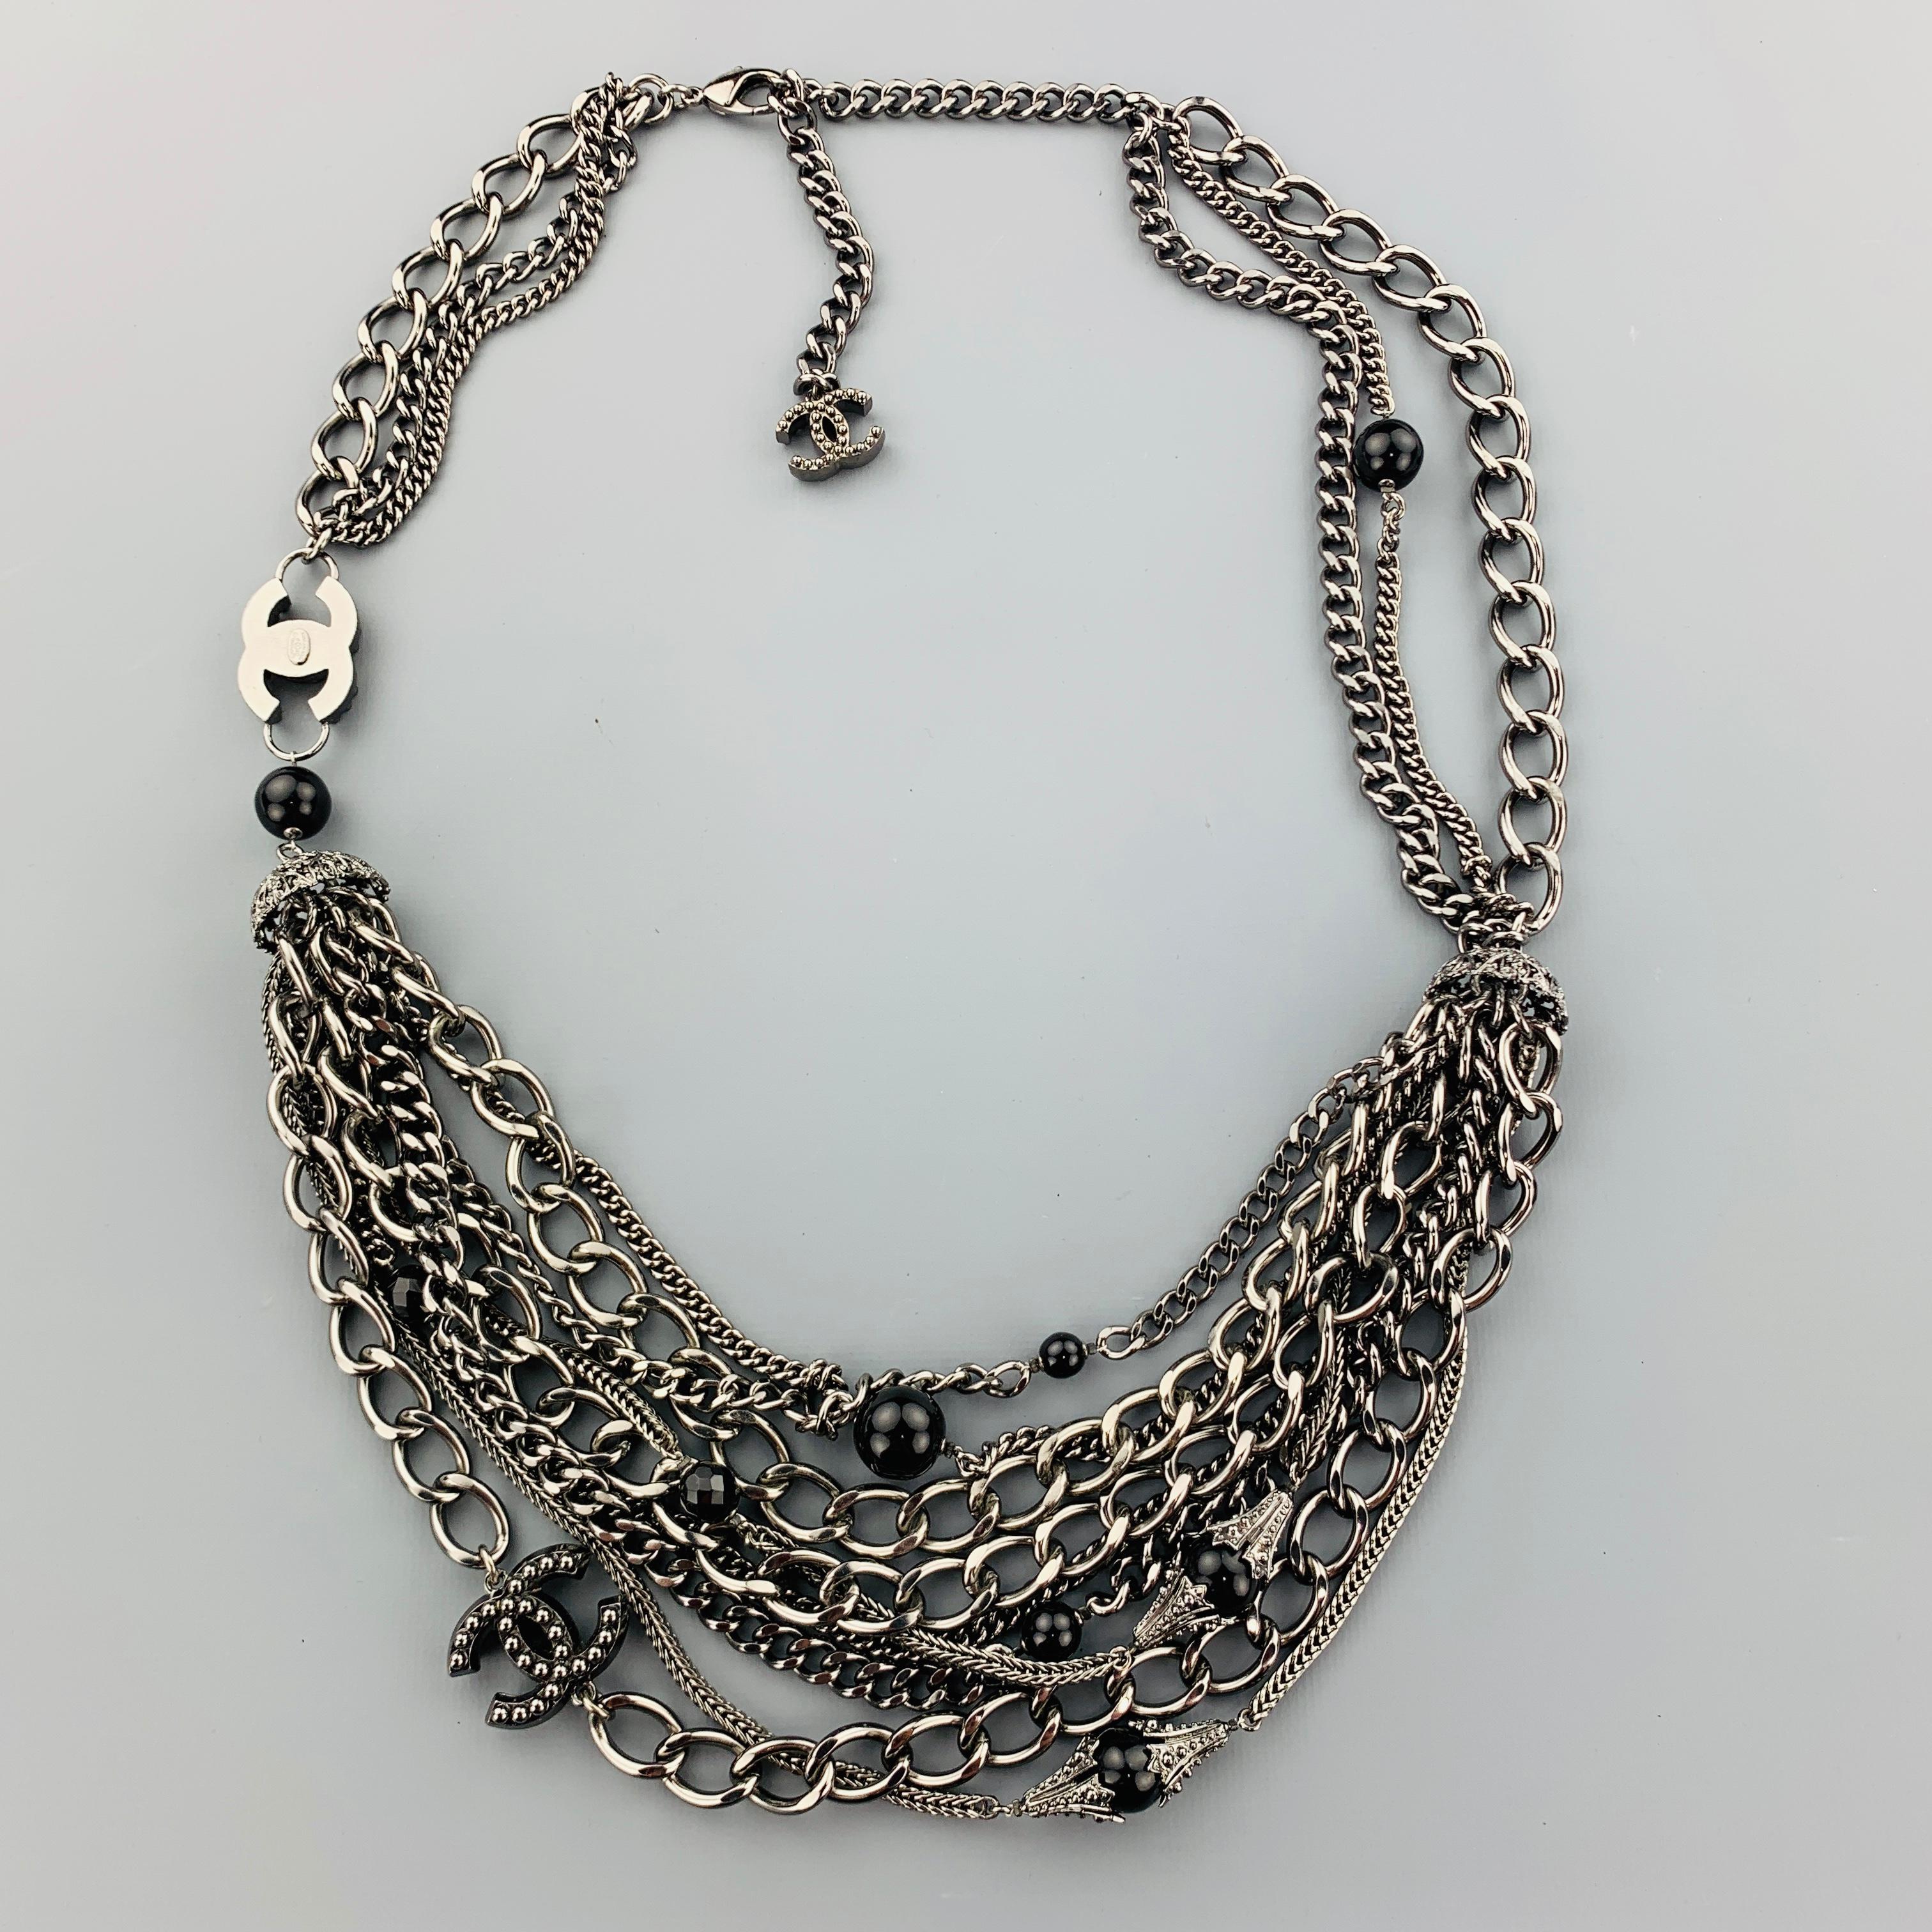 CHANEL 2003 Silver Tone Metal Multi Strand Layered Chain Statement Necklace 3